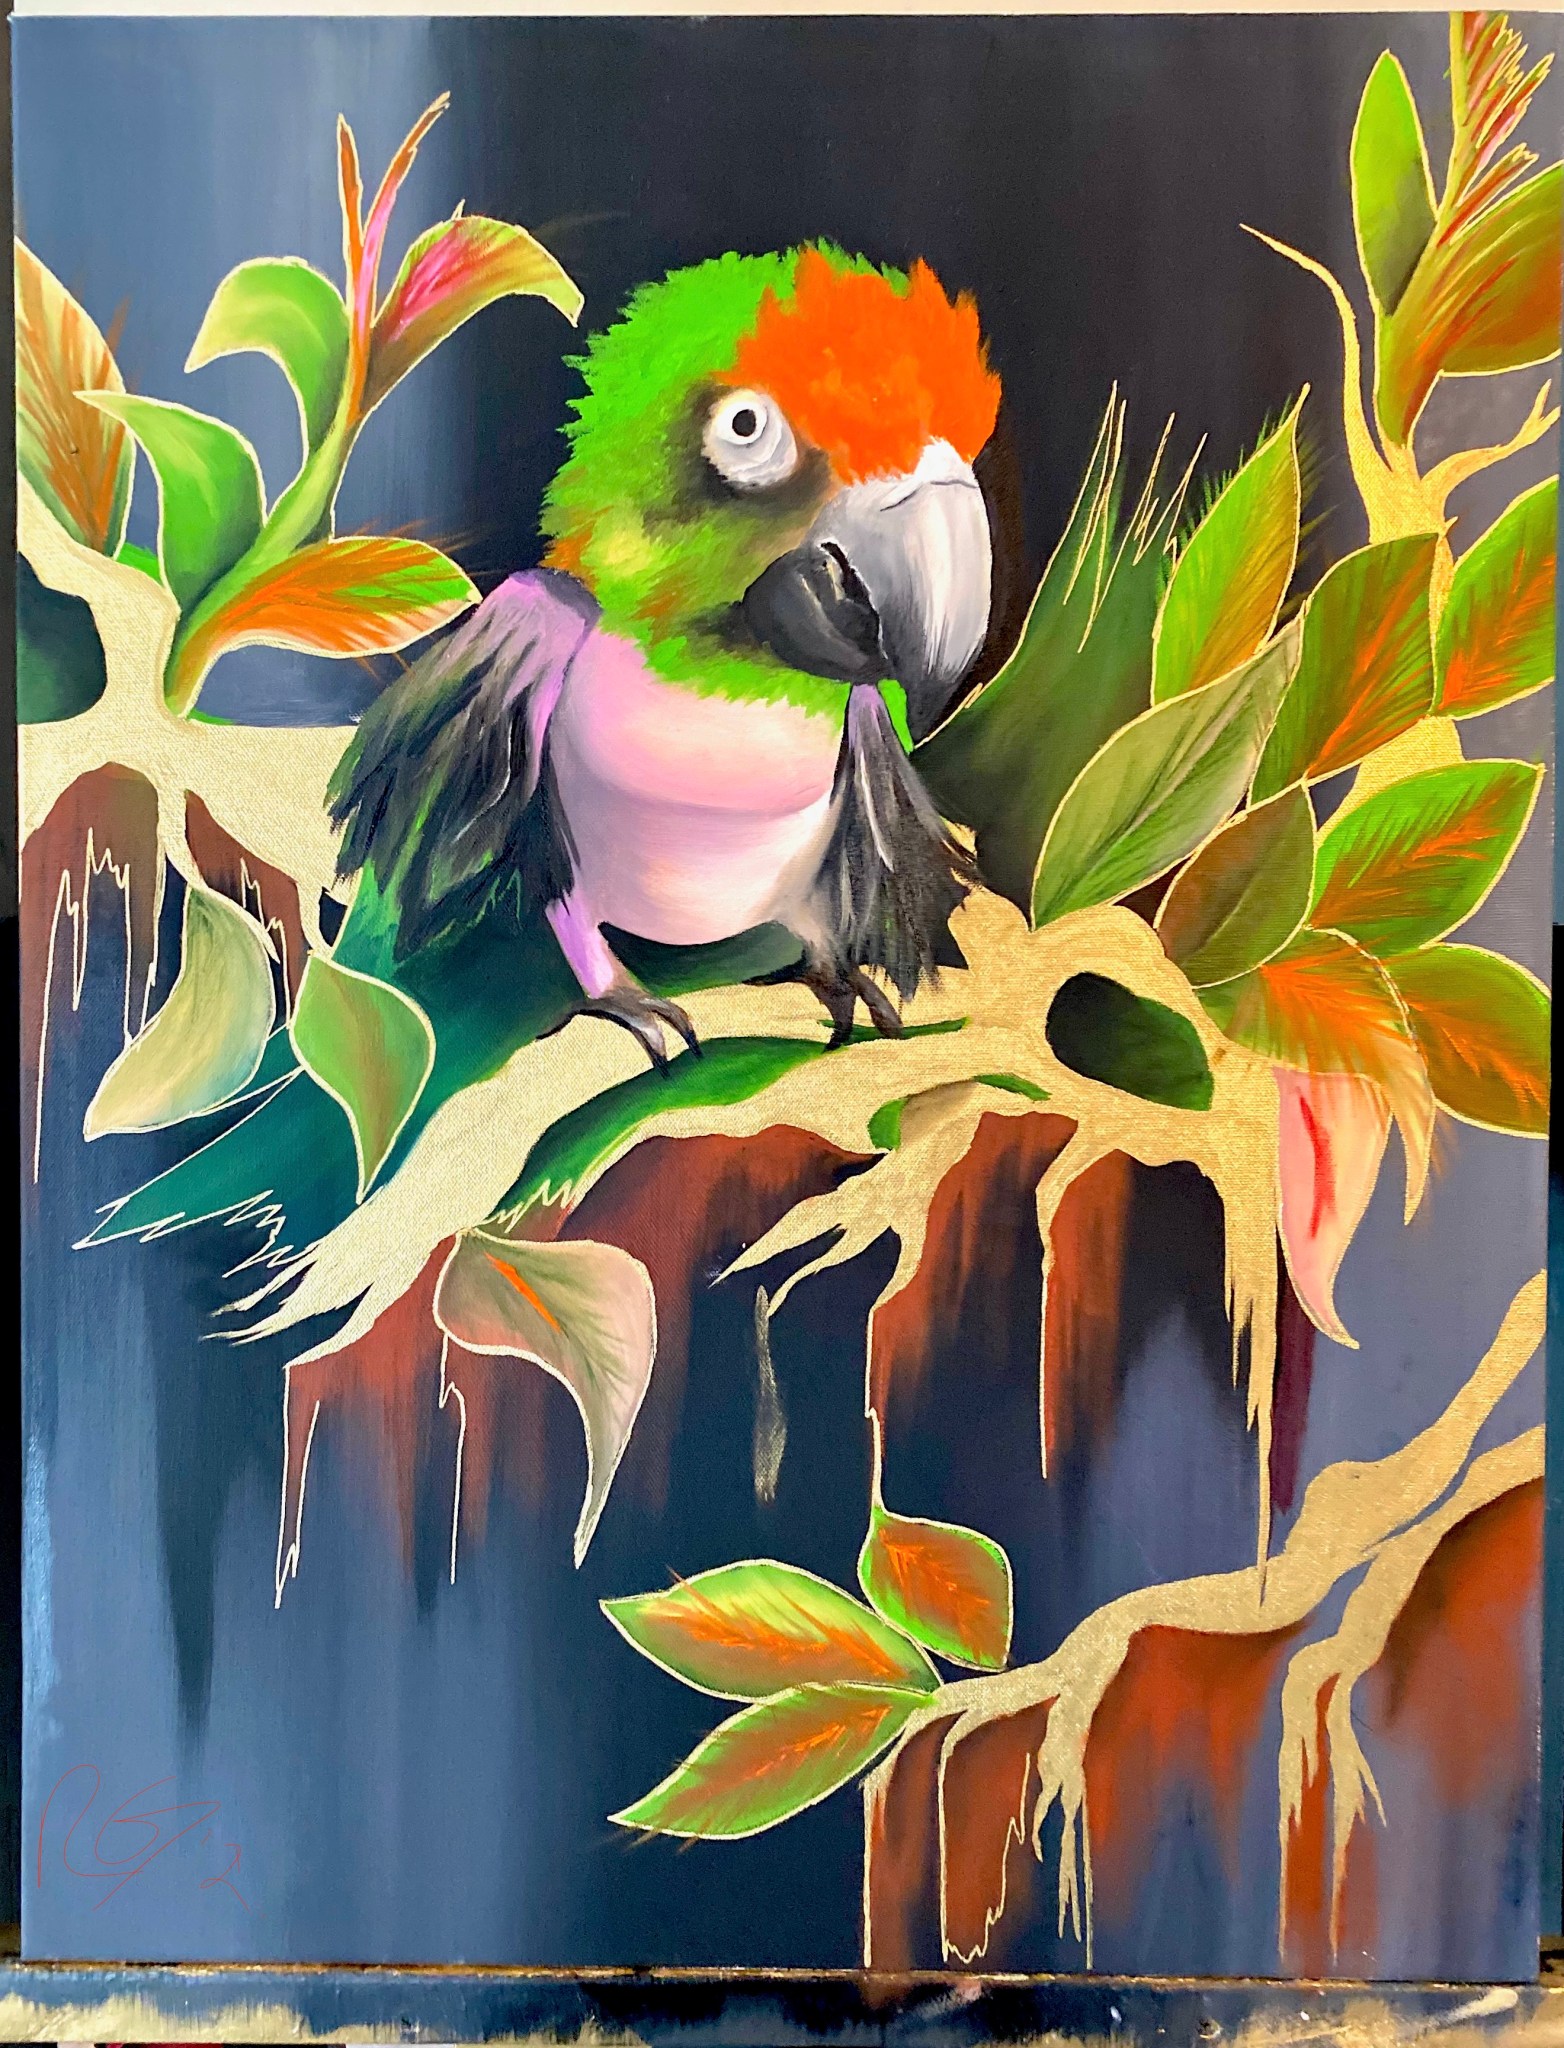 A painting of a green and red tropical bird standing on foliage.